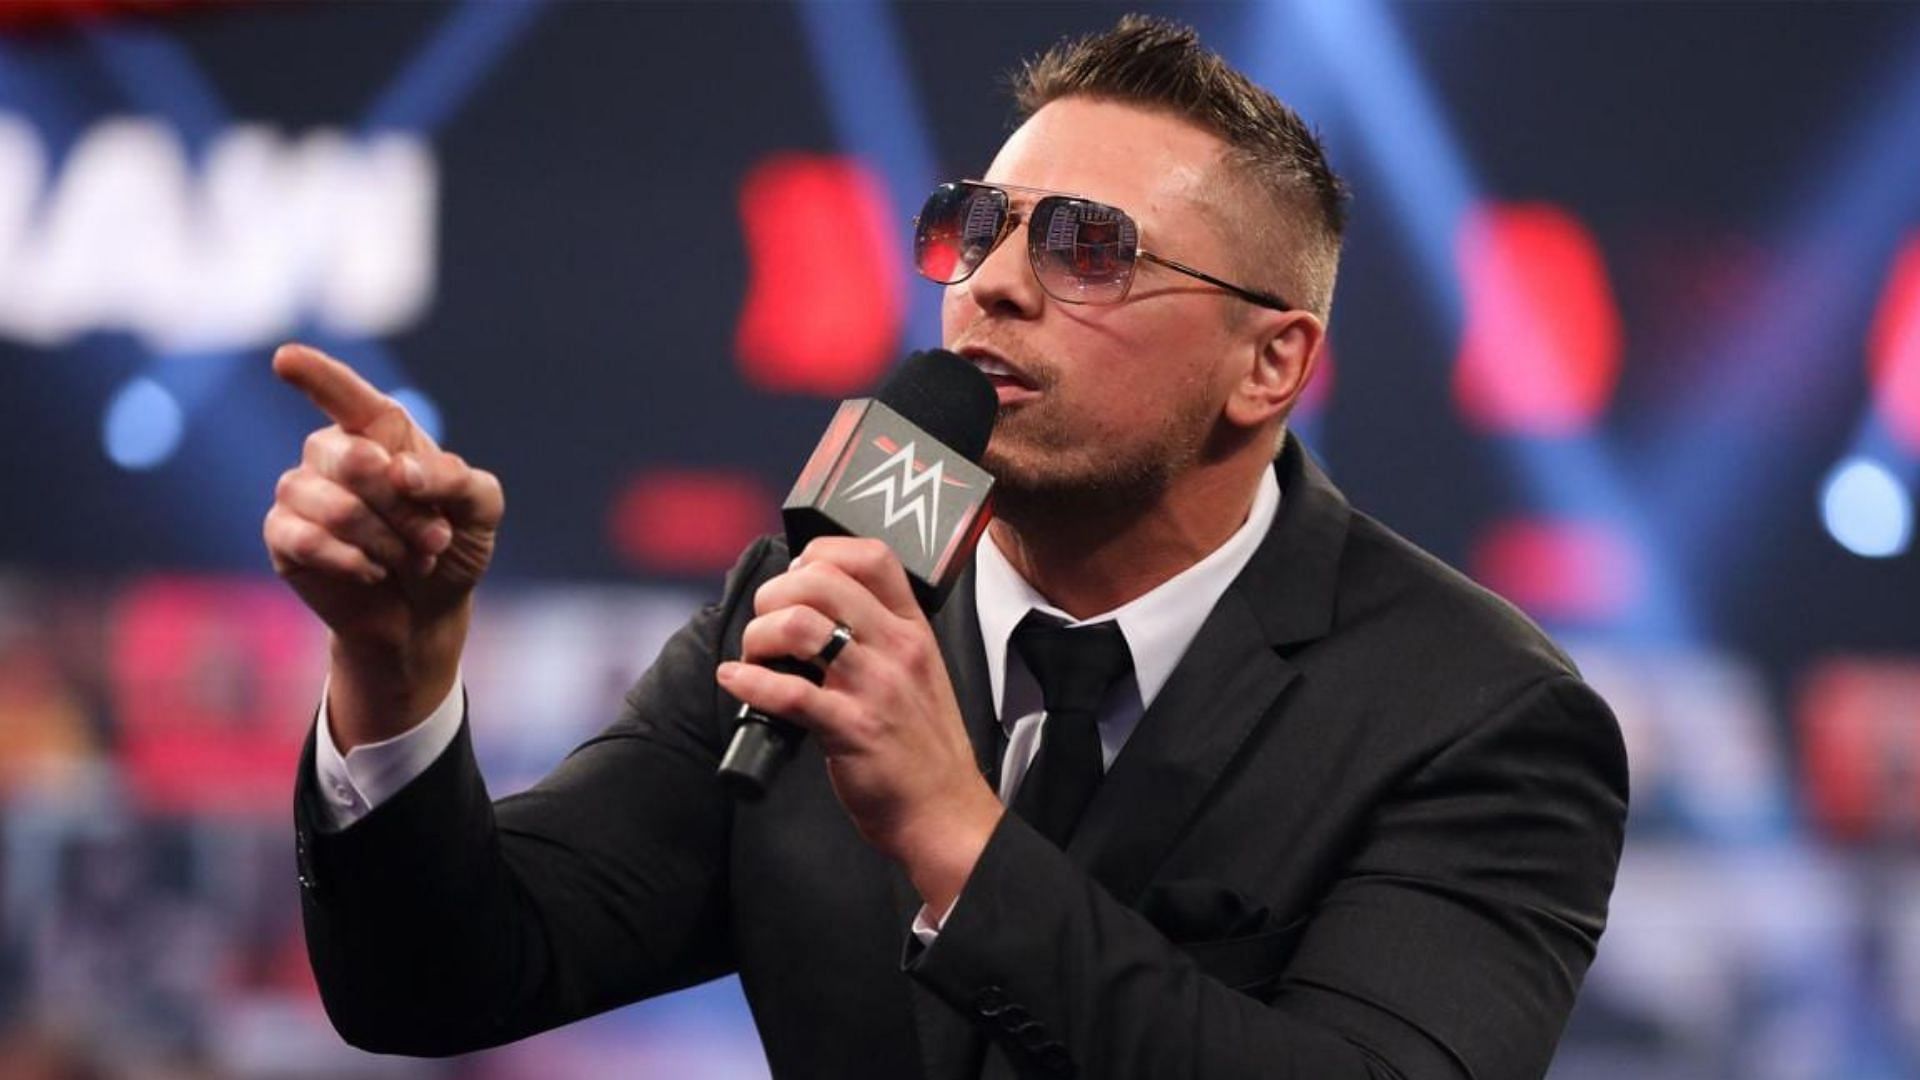 The Miz delivering a promo on an episode of WWE RAW